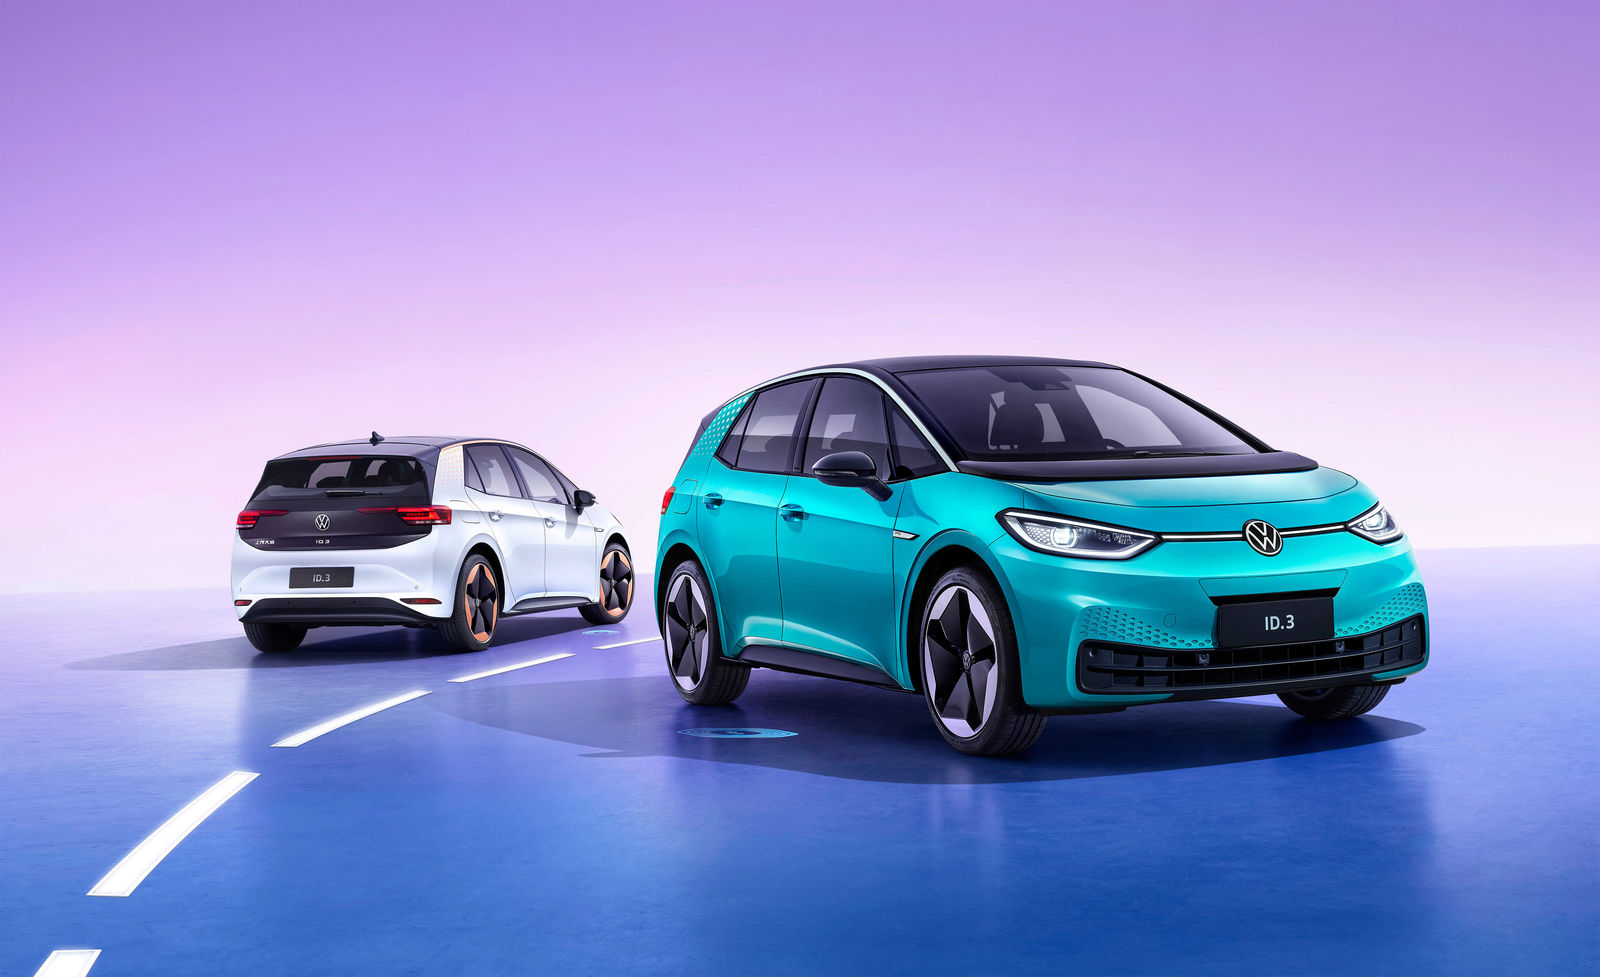 Volkswagen steps up global electrification offensive: ID.3 celebrates debut in China